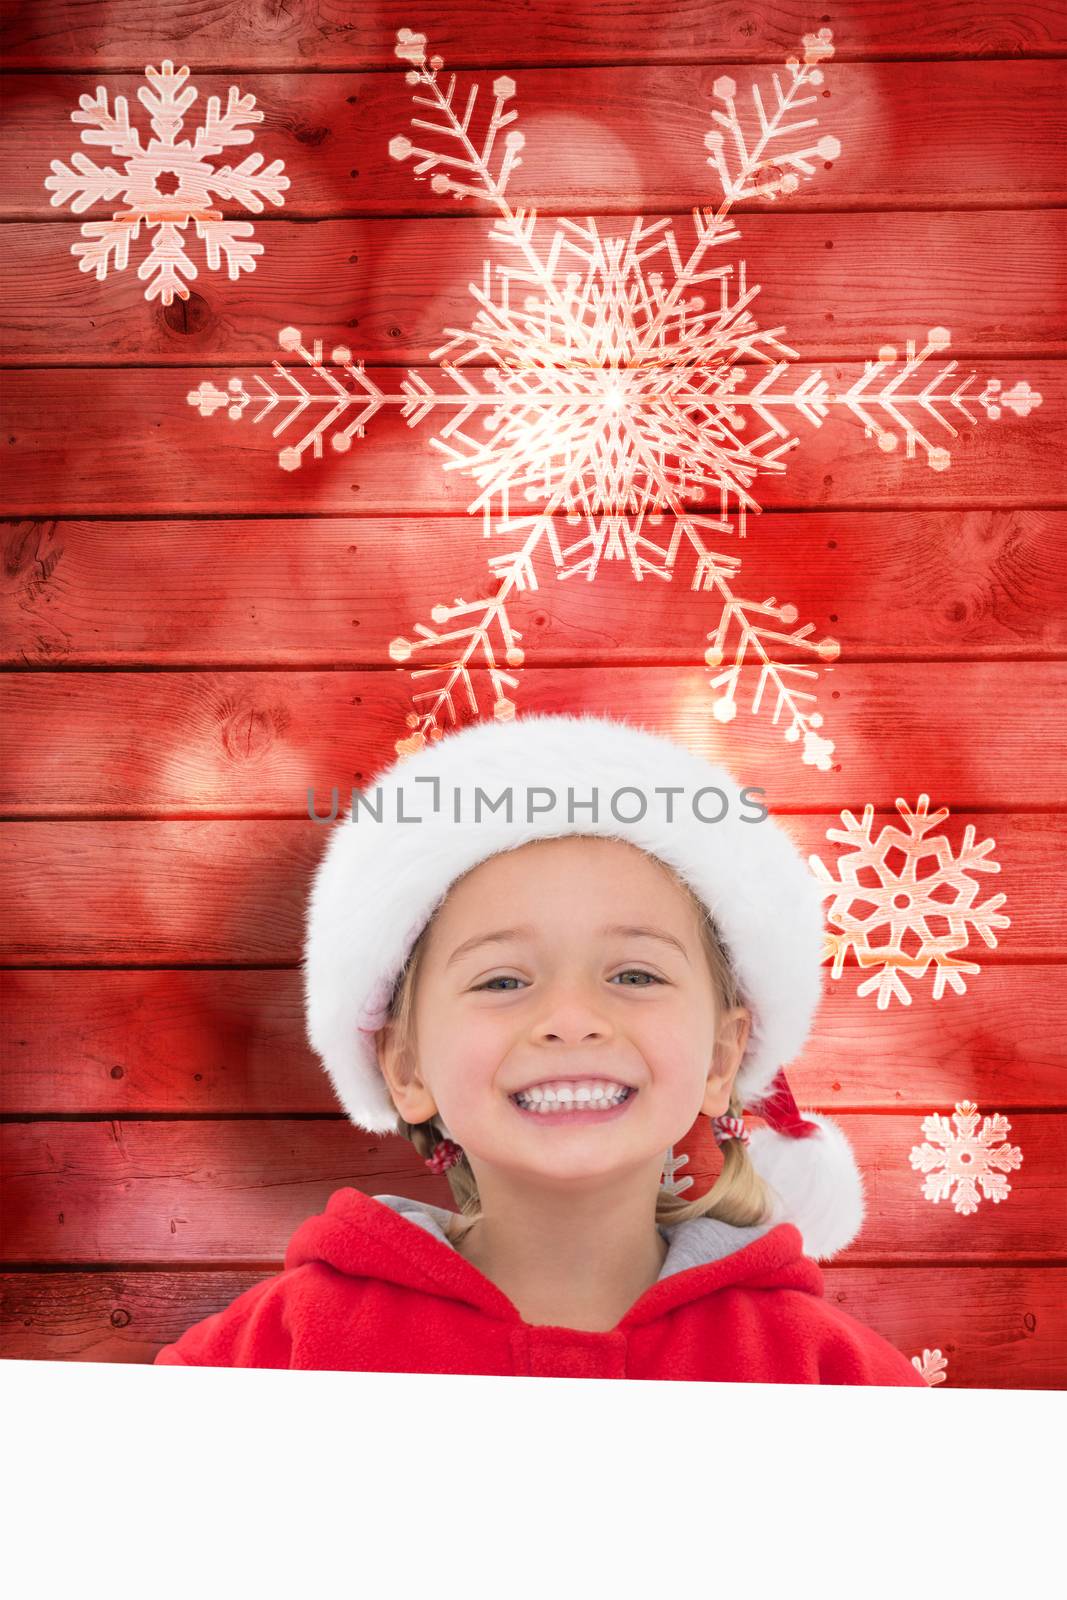 Festive little girl showing poster against snowflake pattern on red planks